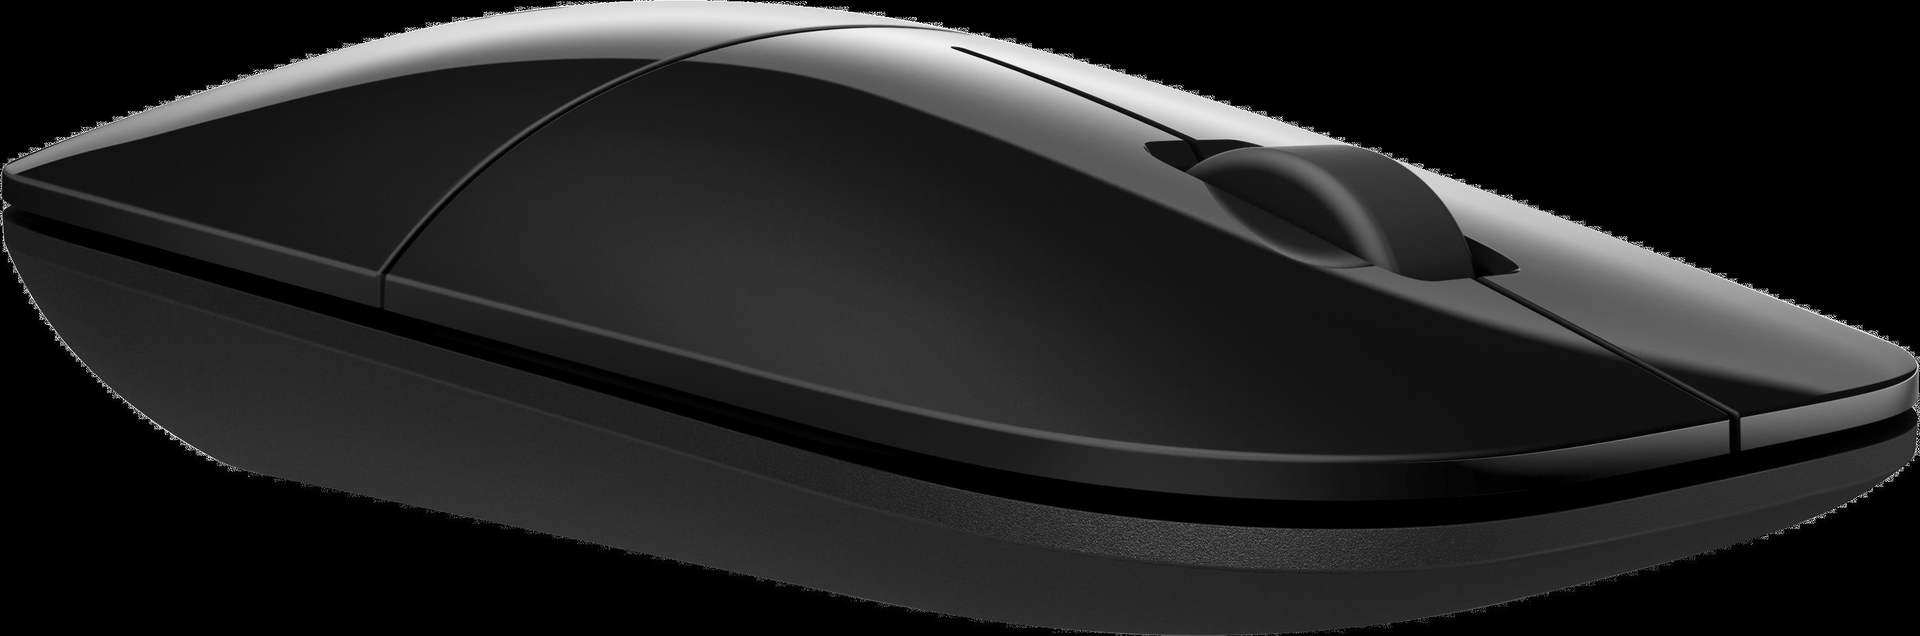 HP Inc. Z3700 BLACK WIRELESS MOUSE EUROPE- ENGLISH LOCALIZATION IN (V0L79AA#ABB)